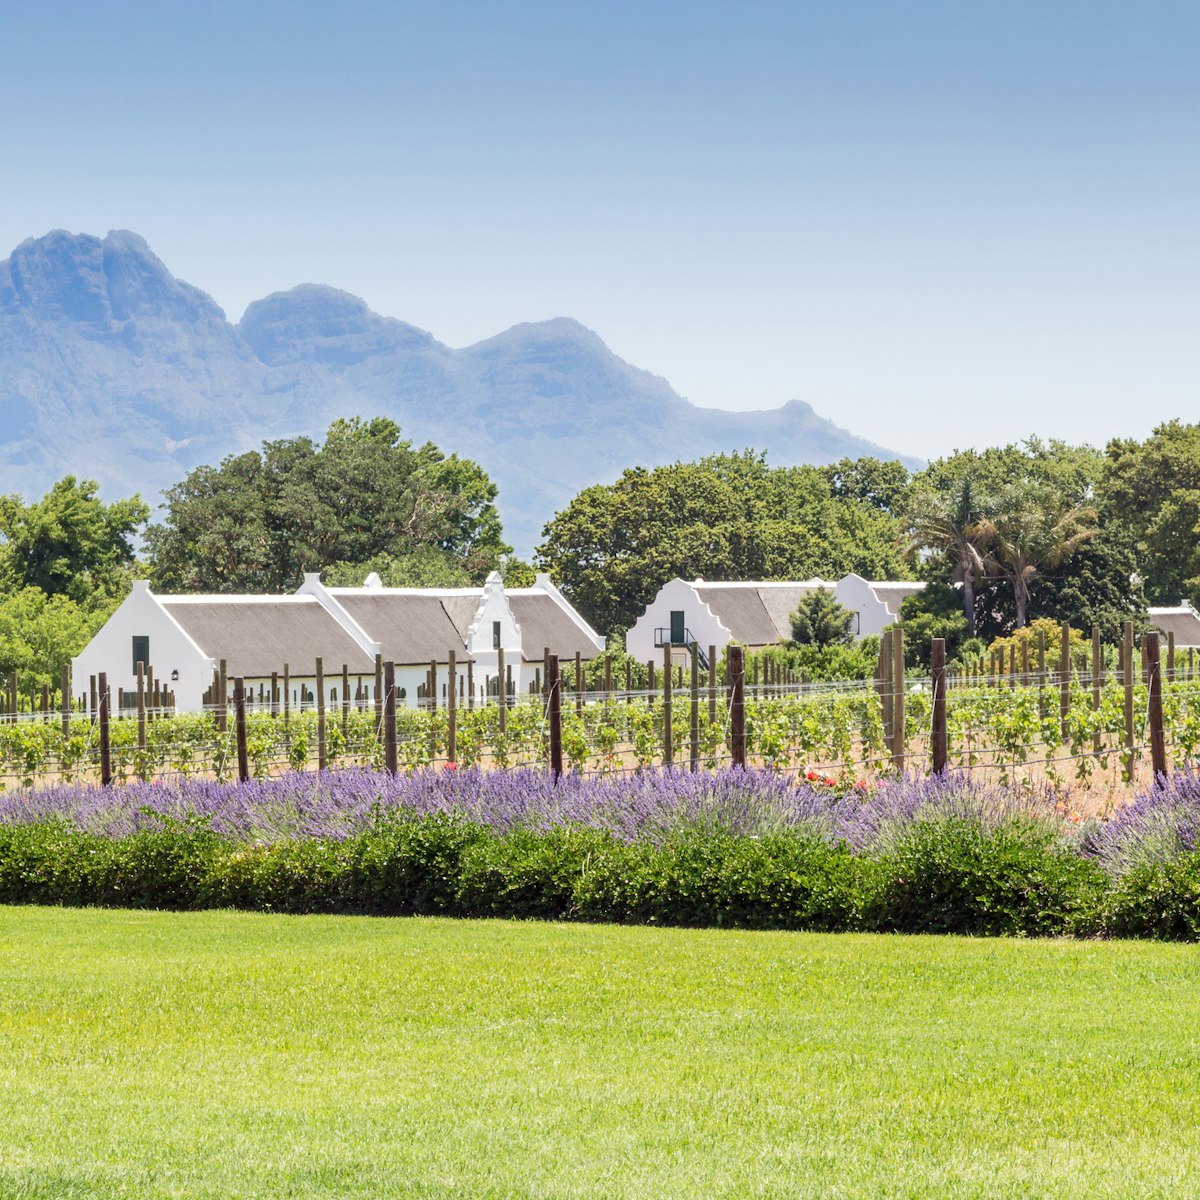 Wine farm in Franschhoek, Western Cape South Africa - Image of La Motte wine estate with young grape vines, roses and lavender plants